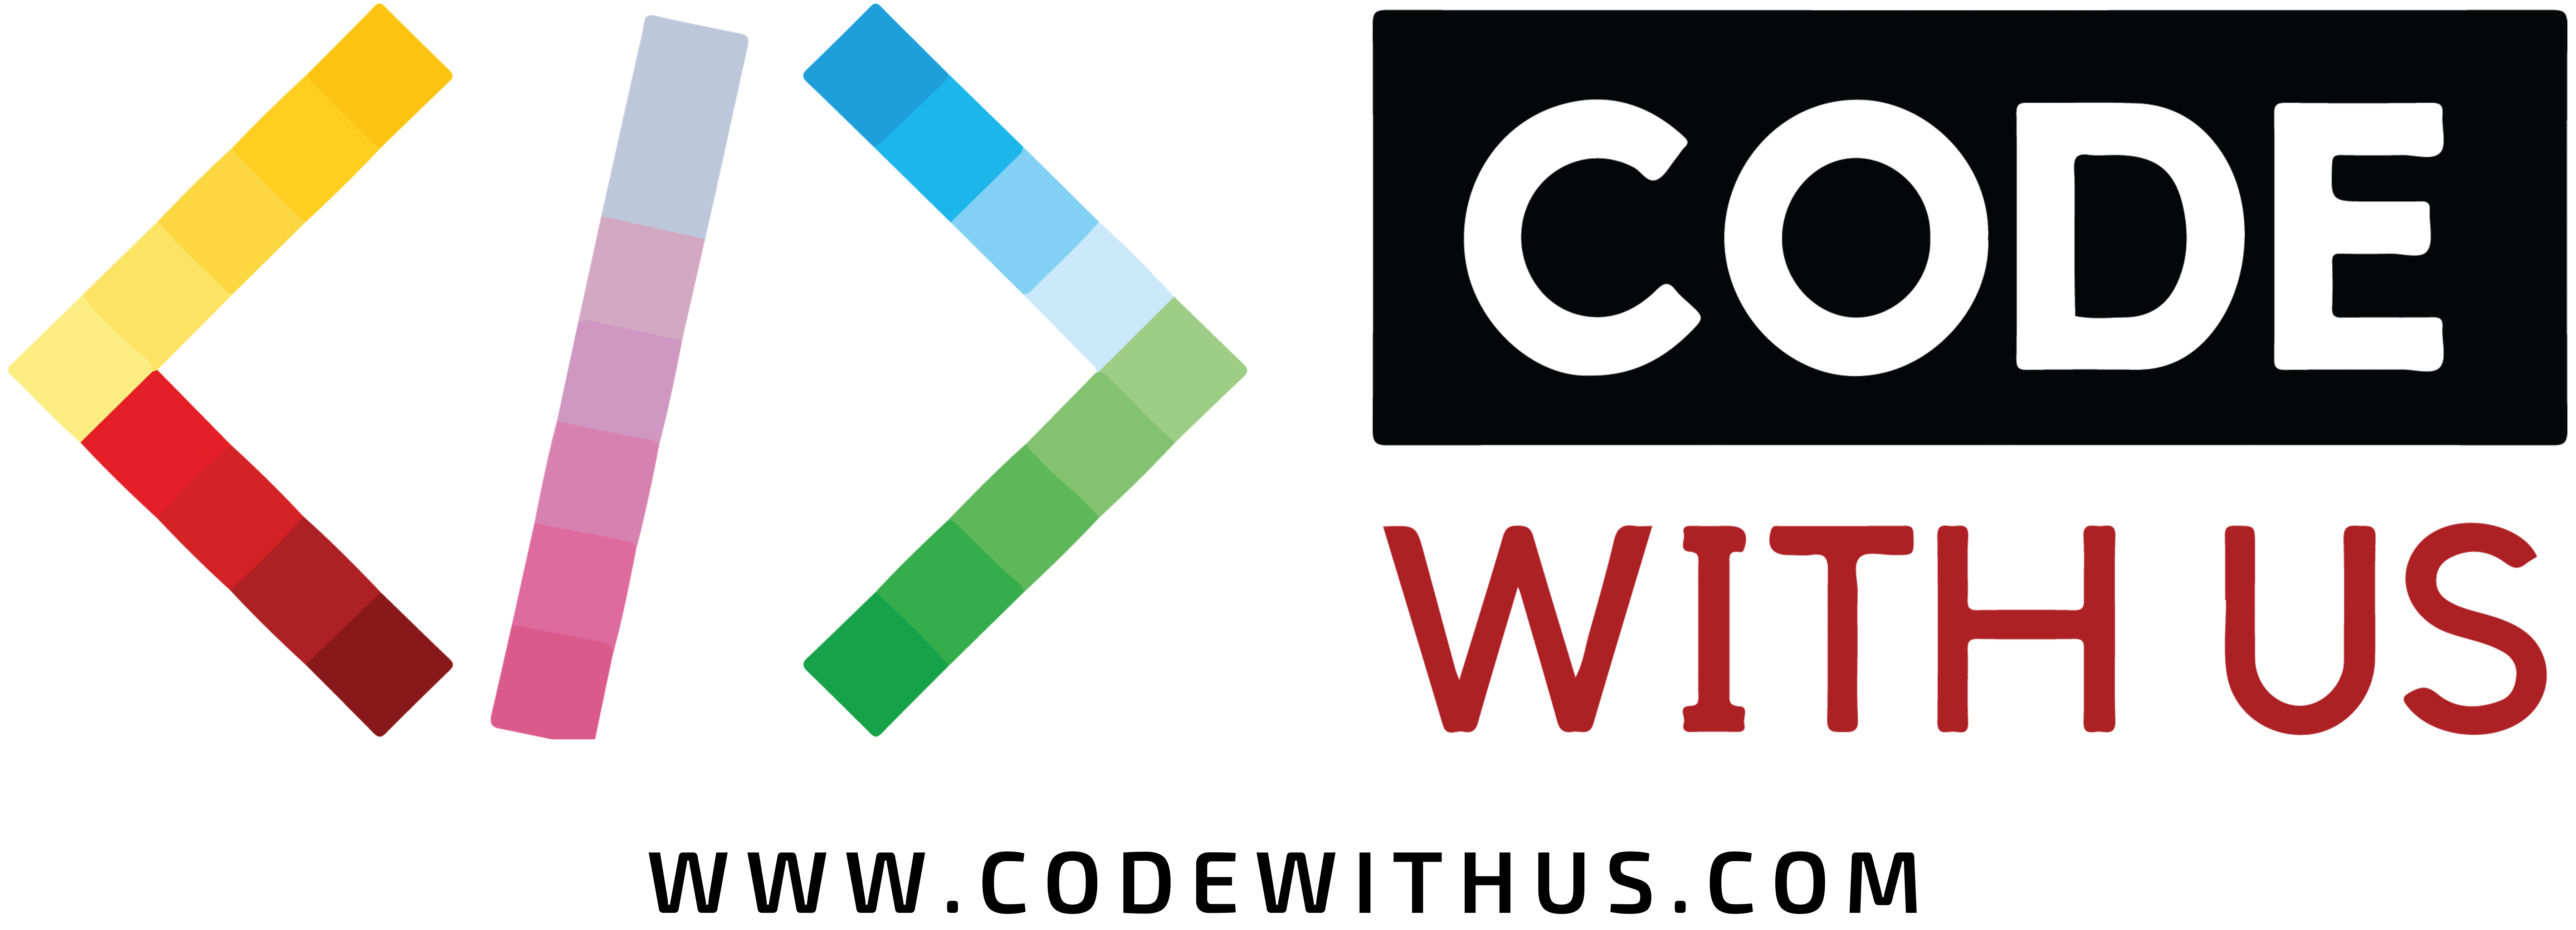 Code with Us logo